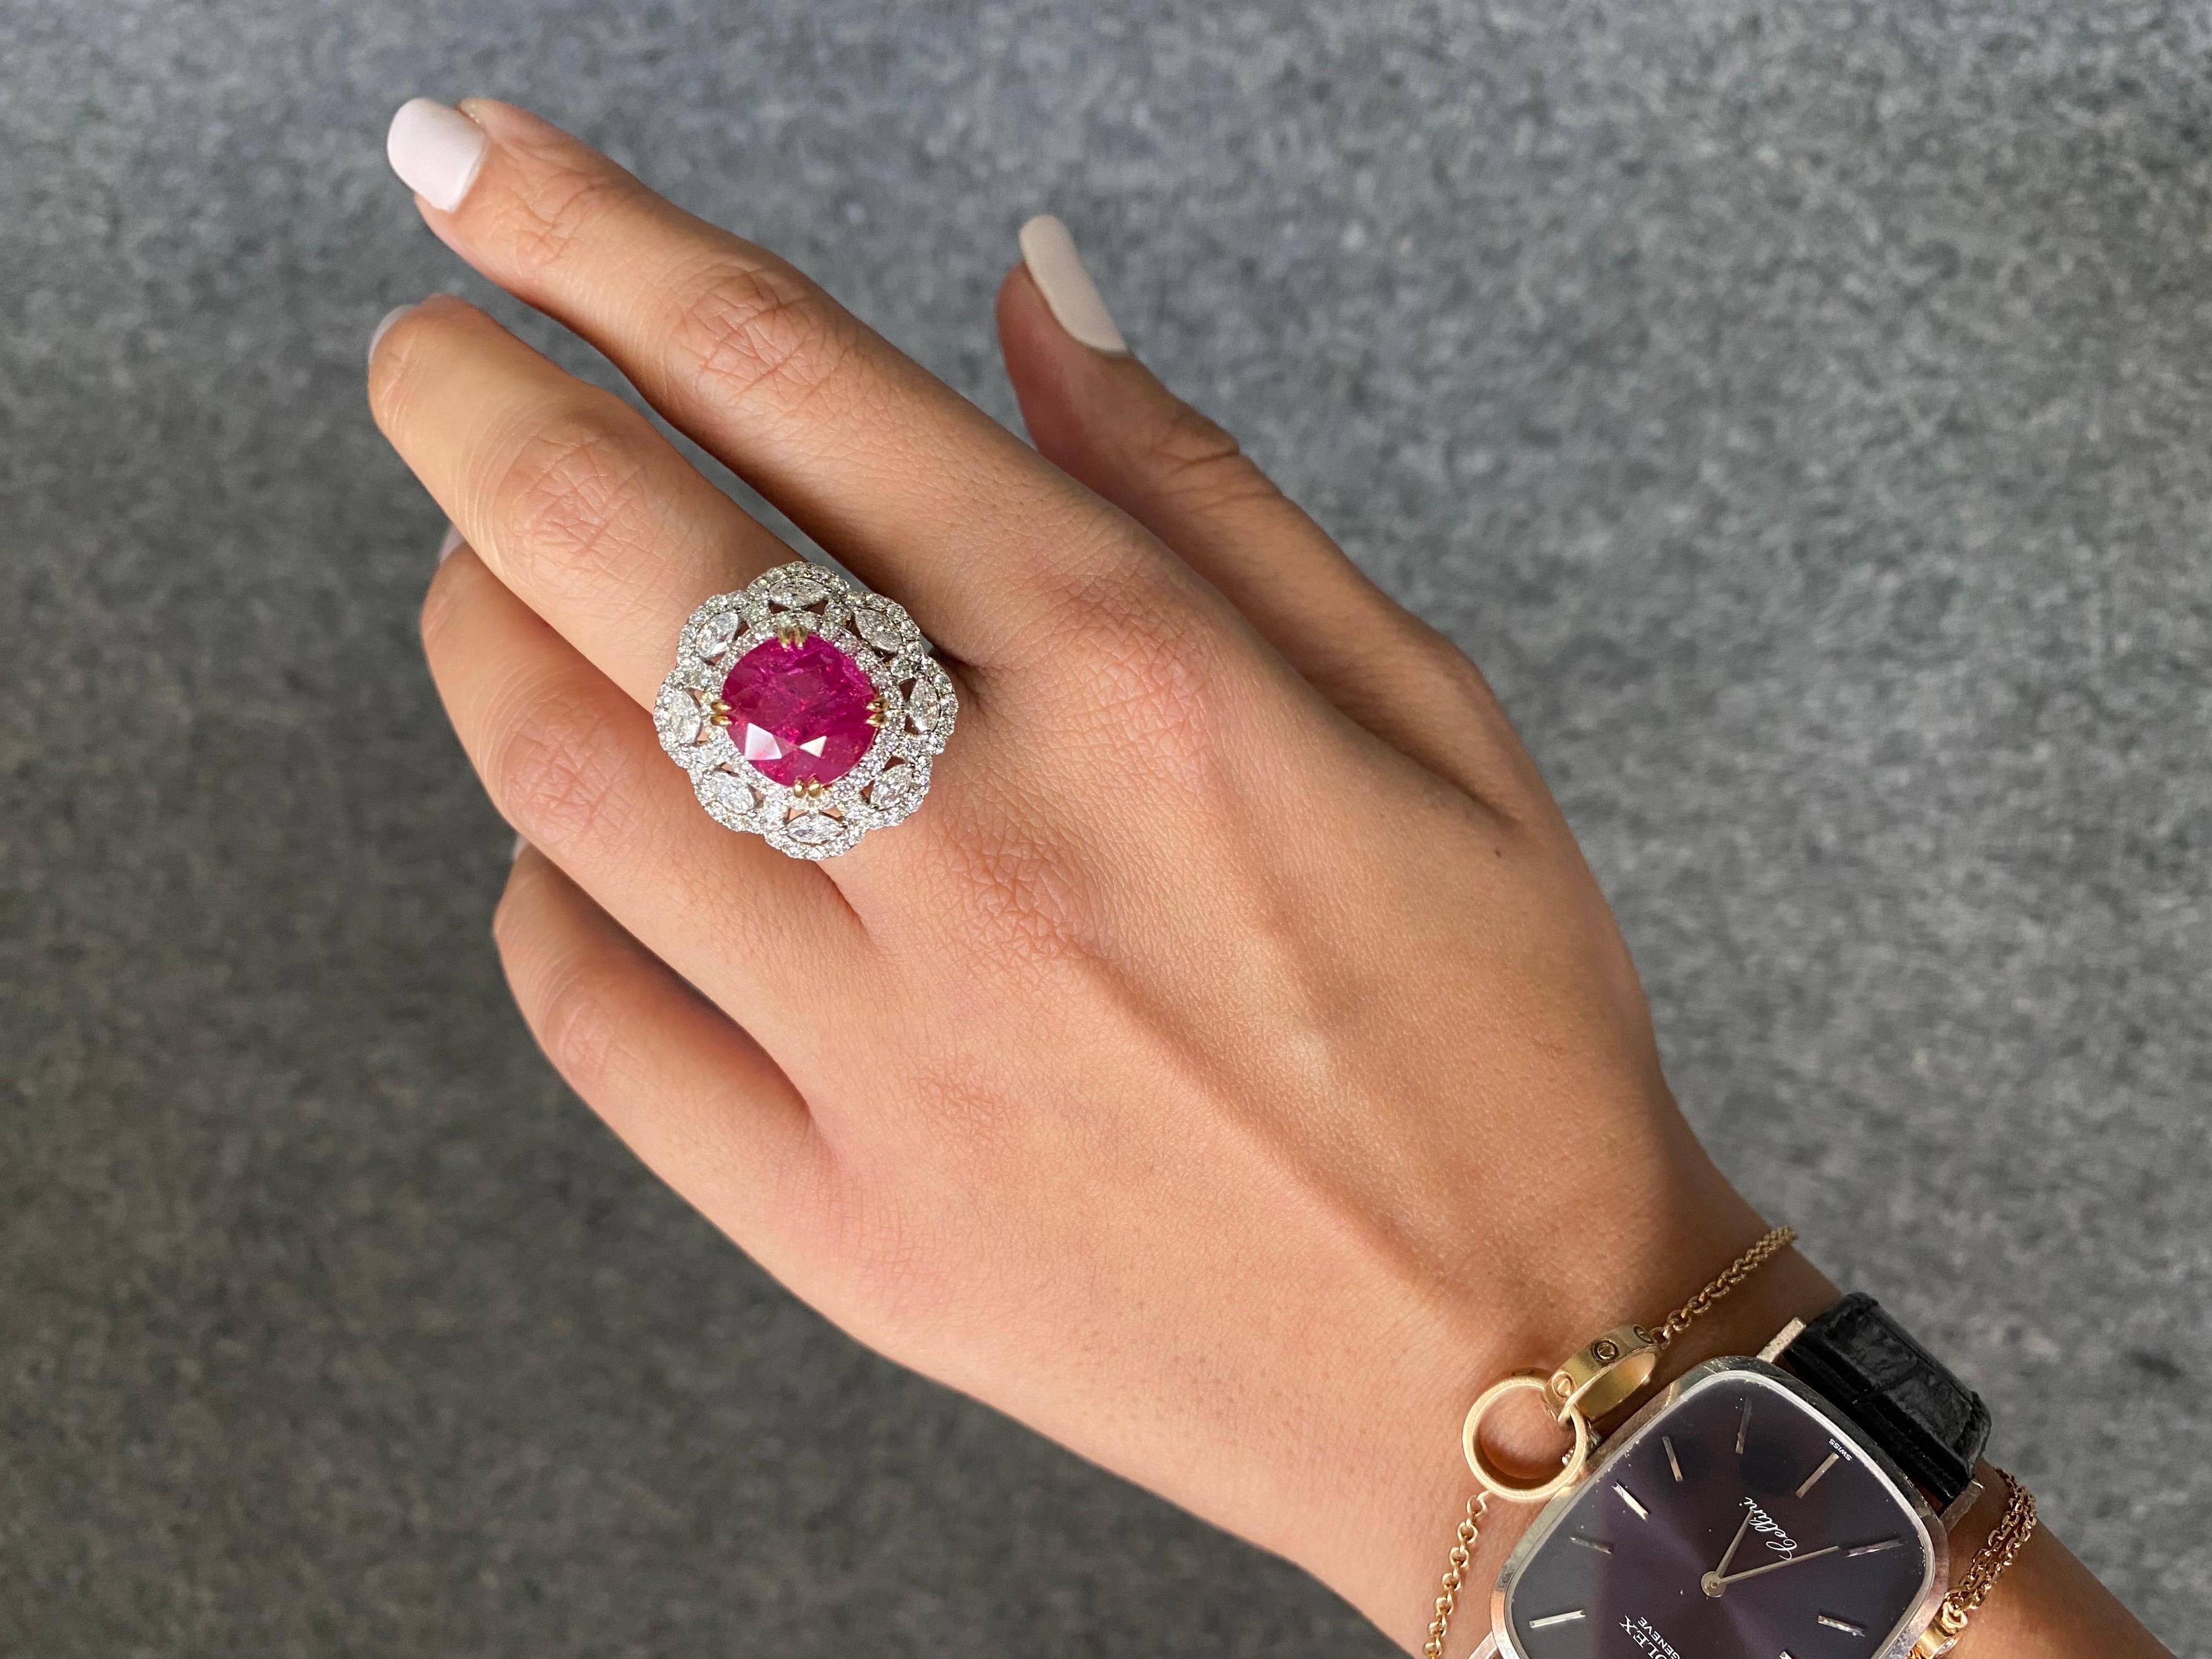 A stunning, GRS certified 9.90 carat, no heat cushion shaped Burmese Ruby and White Diamond ring, set in solid 18K White Gold. The Ruby is natural and not heat treated, completely transparent, with a beautiful pinkish-red hue and great luster. This